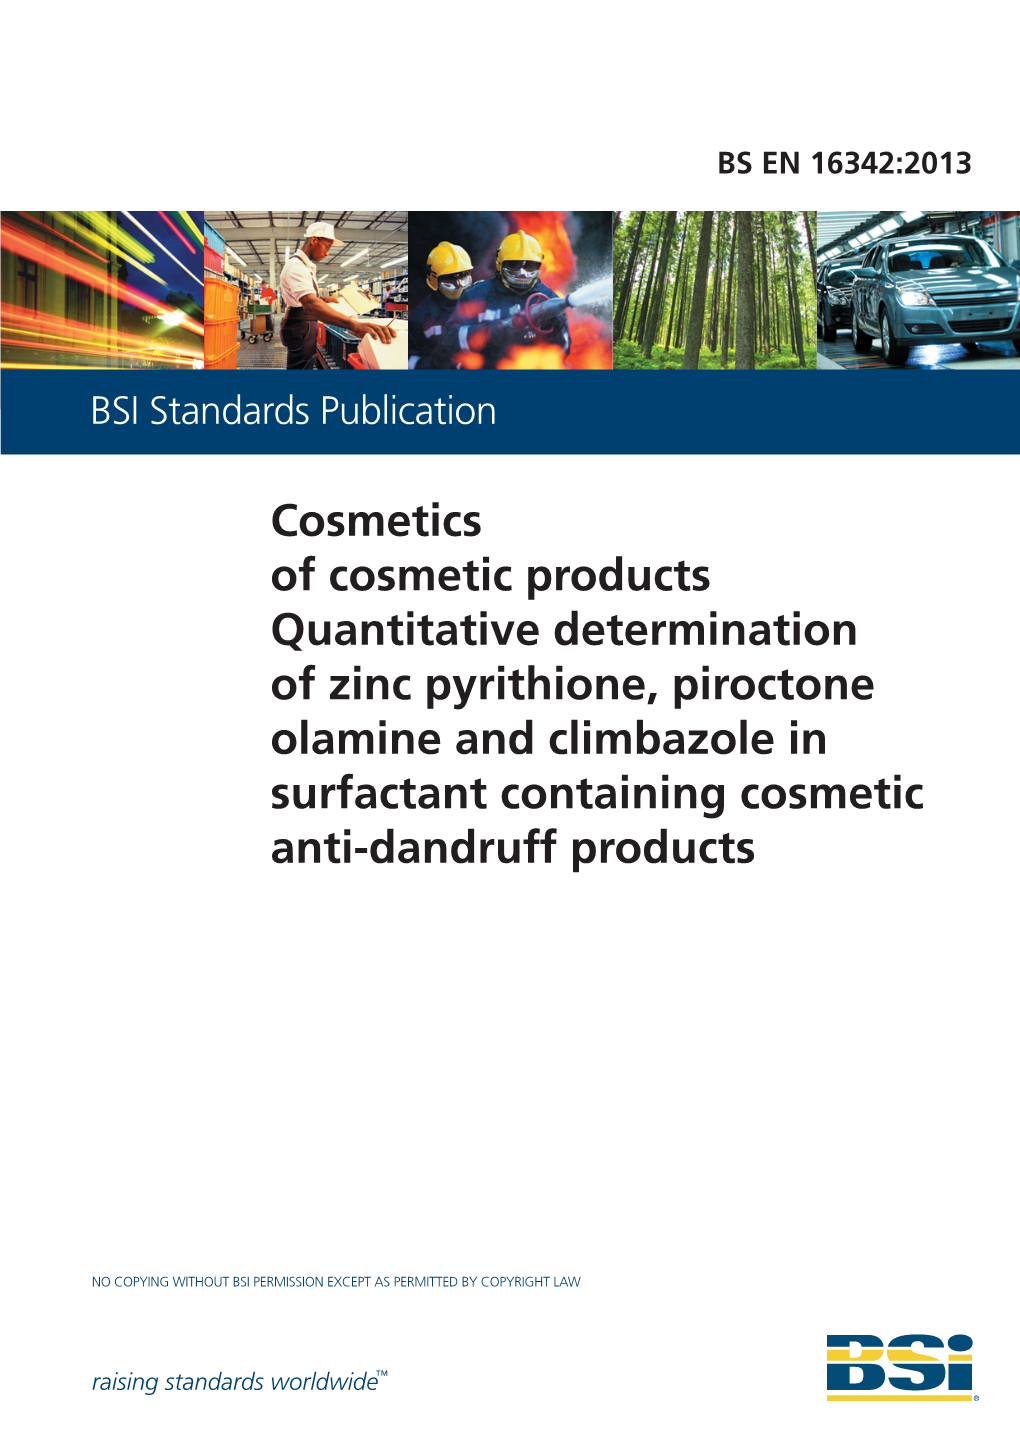 Quantitative Determination of Zinc Pyrithione, Piroctone Olamine and Climbazole in Surfactant Containing Cosmetic Anti-Dandruff Products